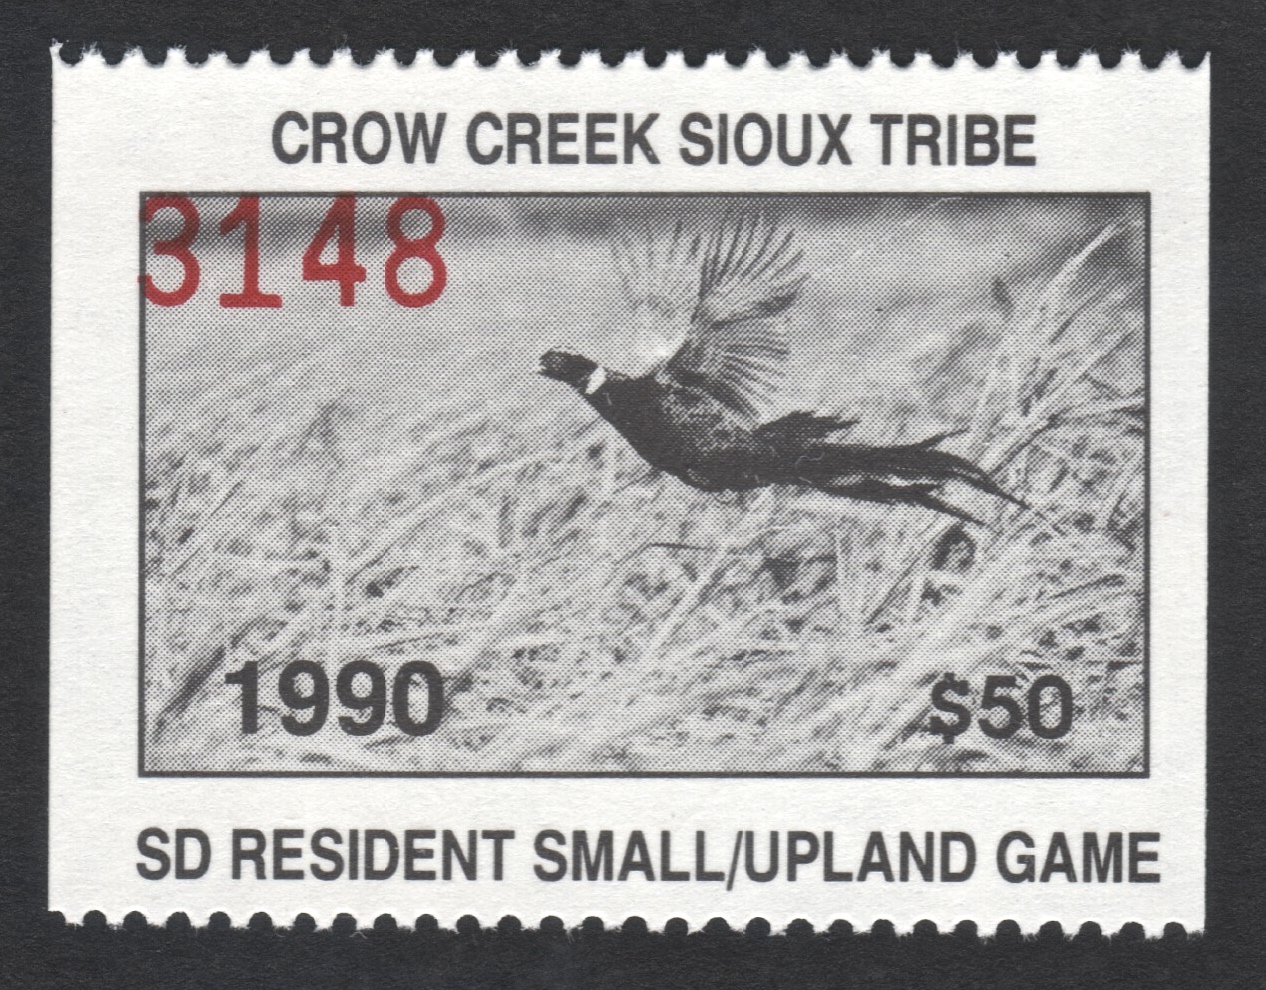 1990 Crow Creek Resident Small/Upland Game